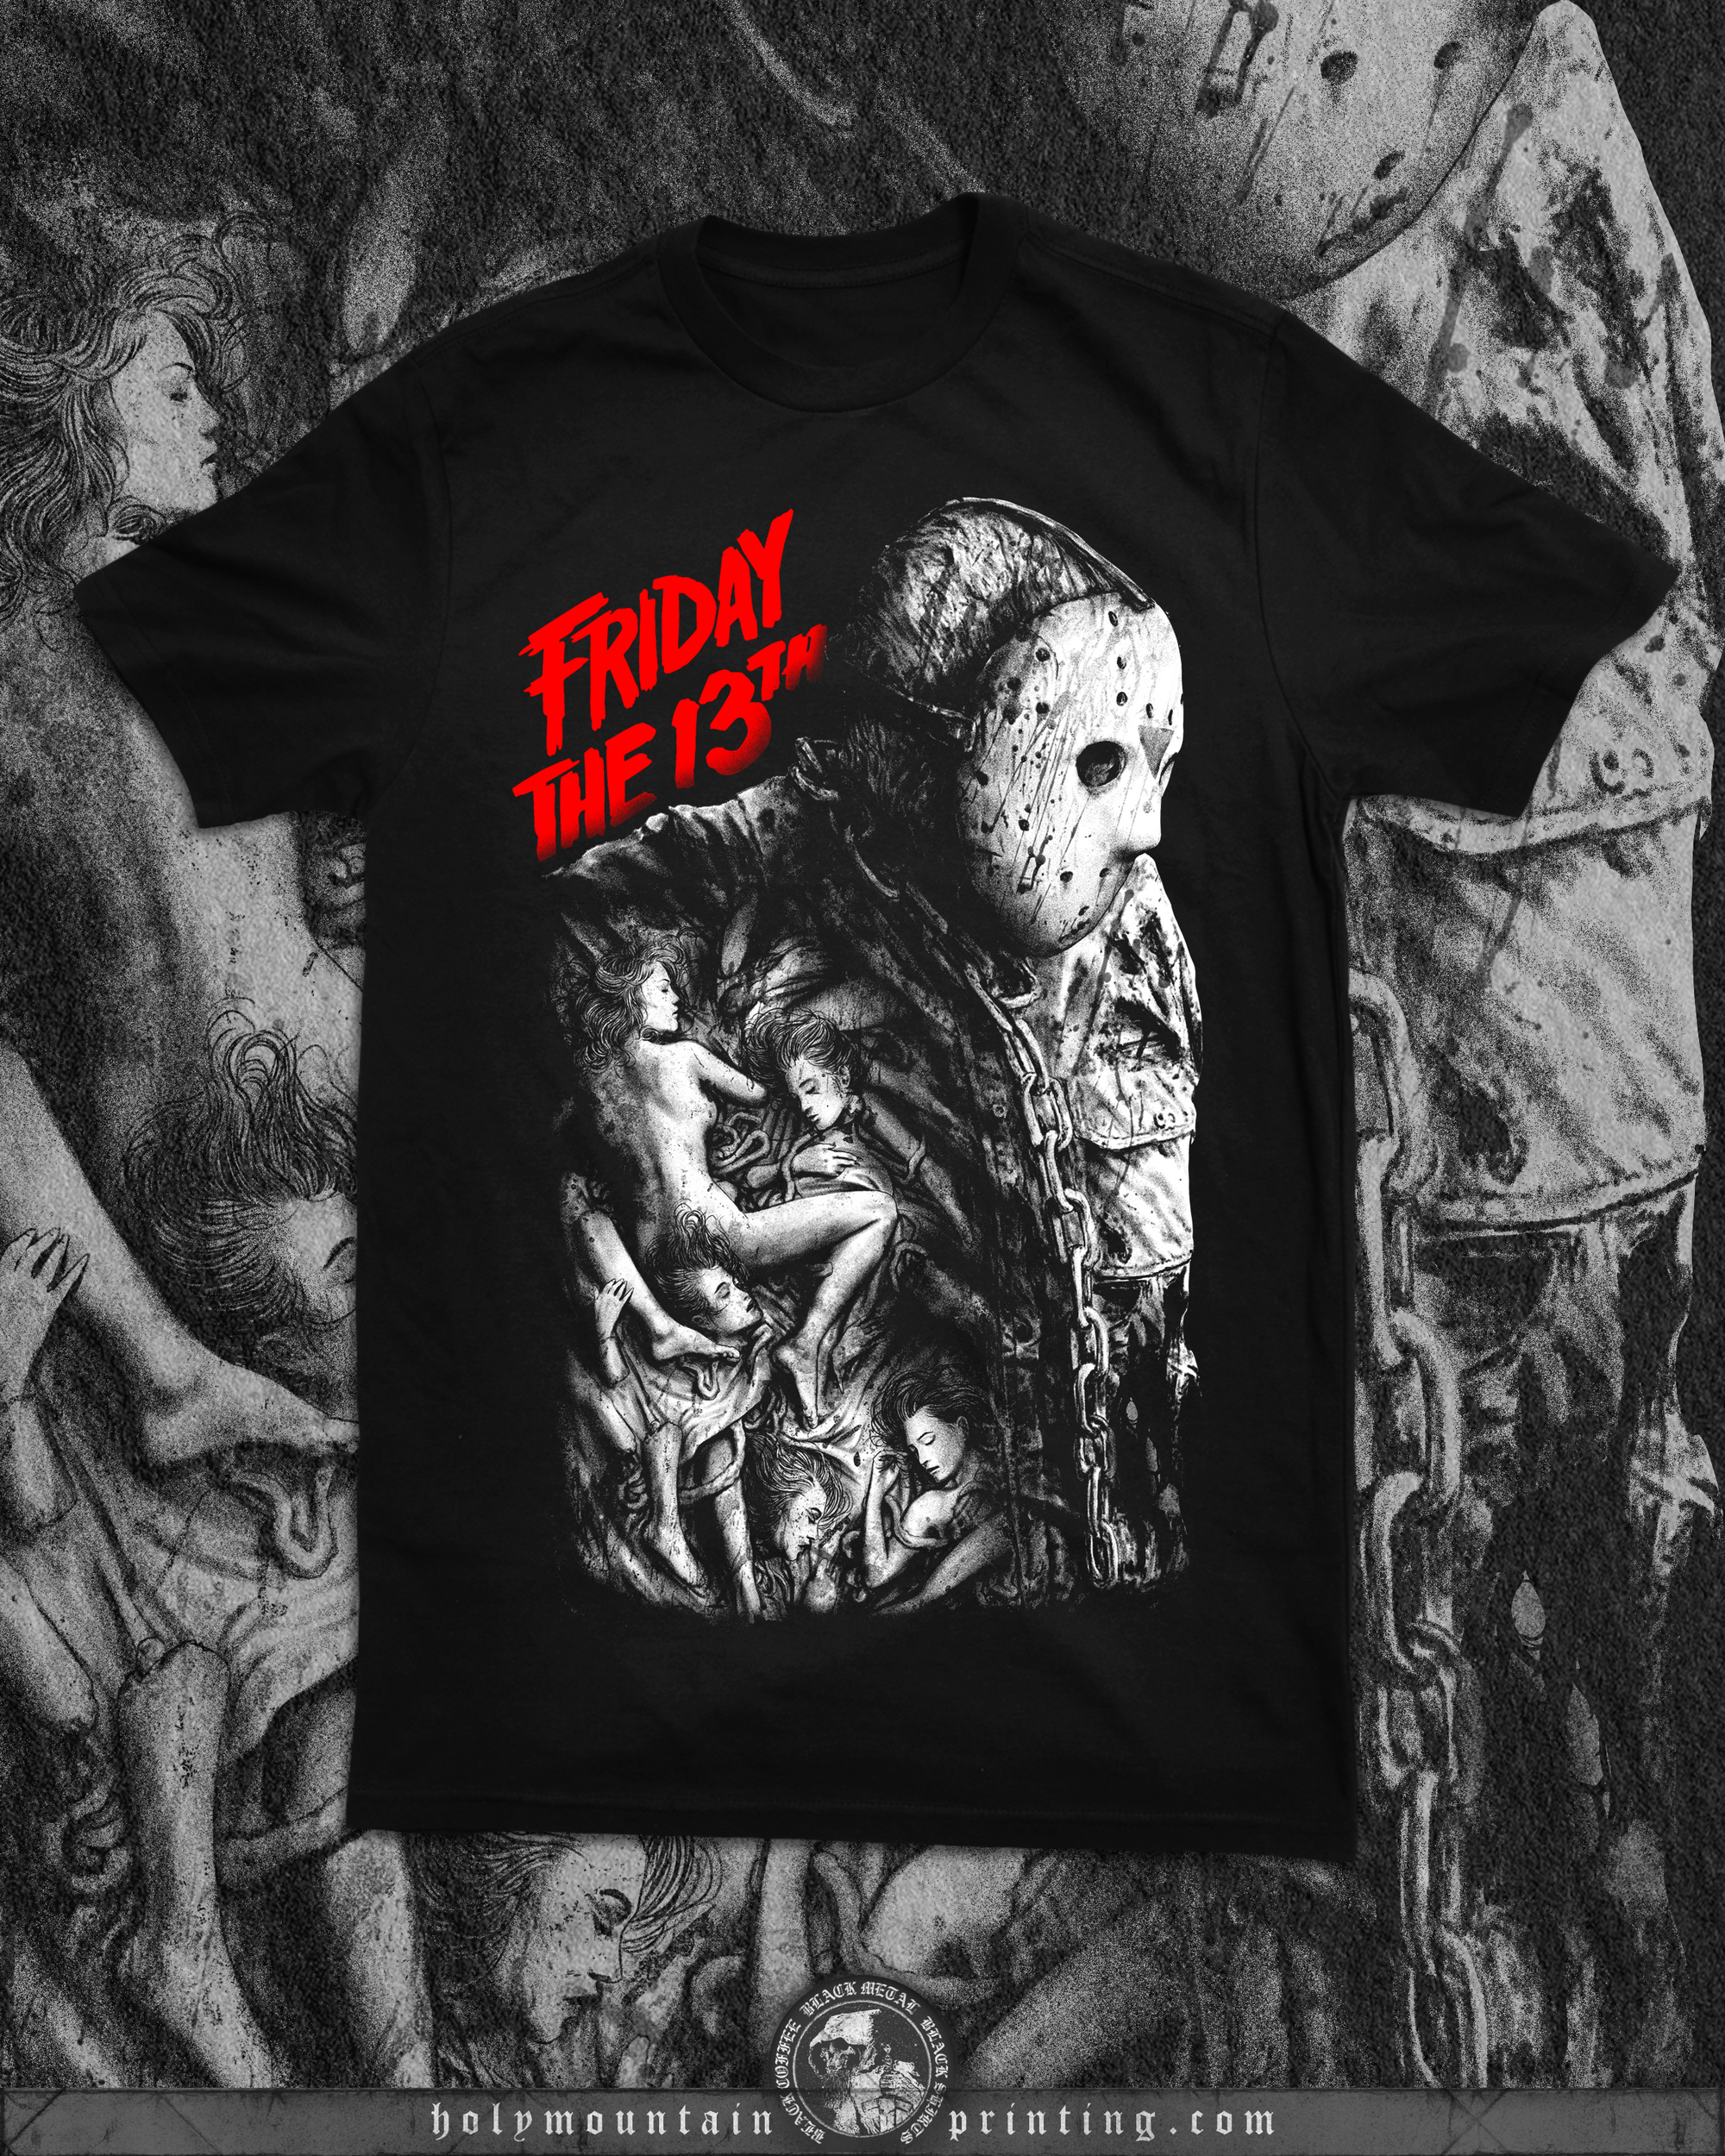 ABACROMBIE INK "FRIDAY THE 13th" SHIRT